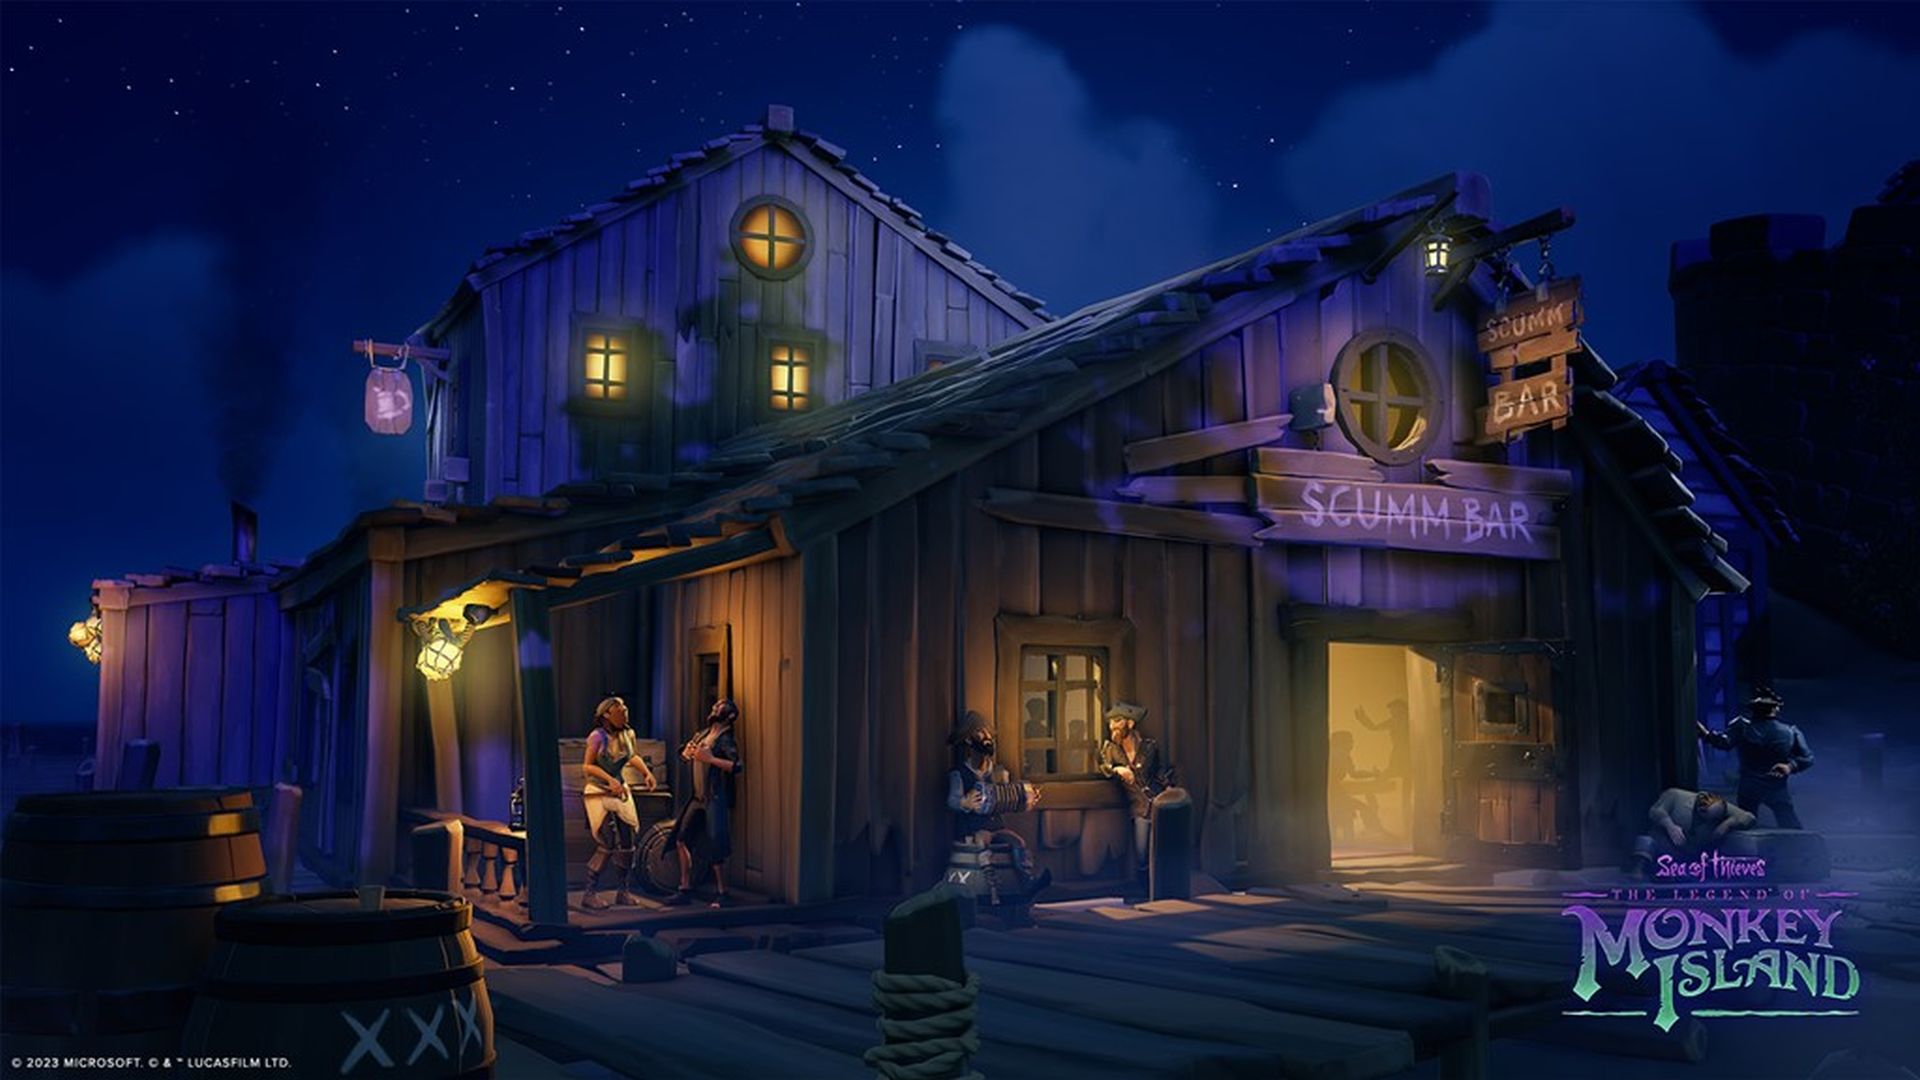 Sea of Thieves Kicks Off Second Tall Tale Part of The Legend of Monkey Island Collaboration